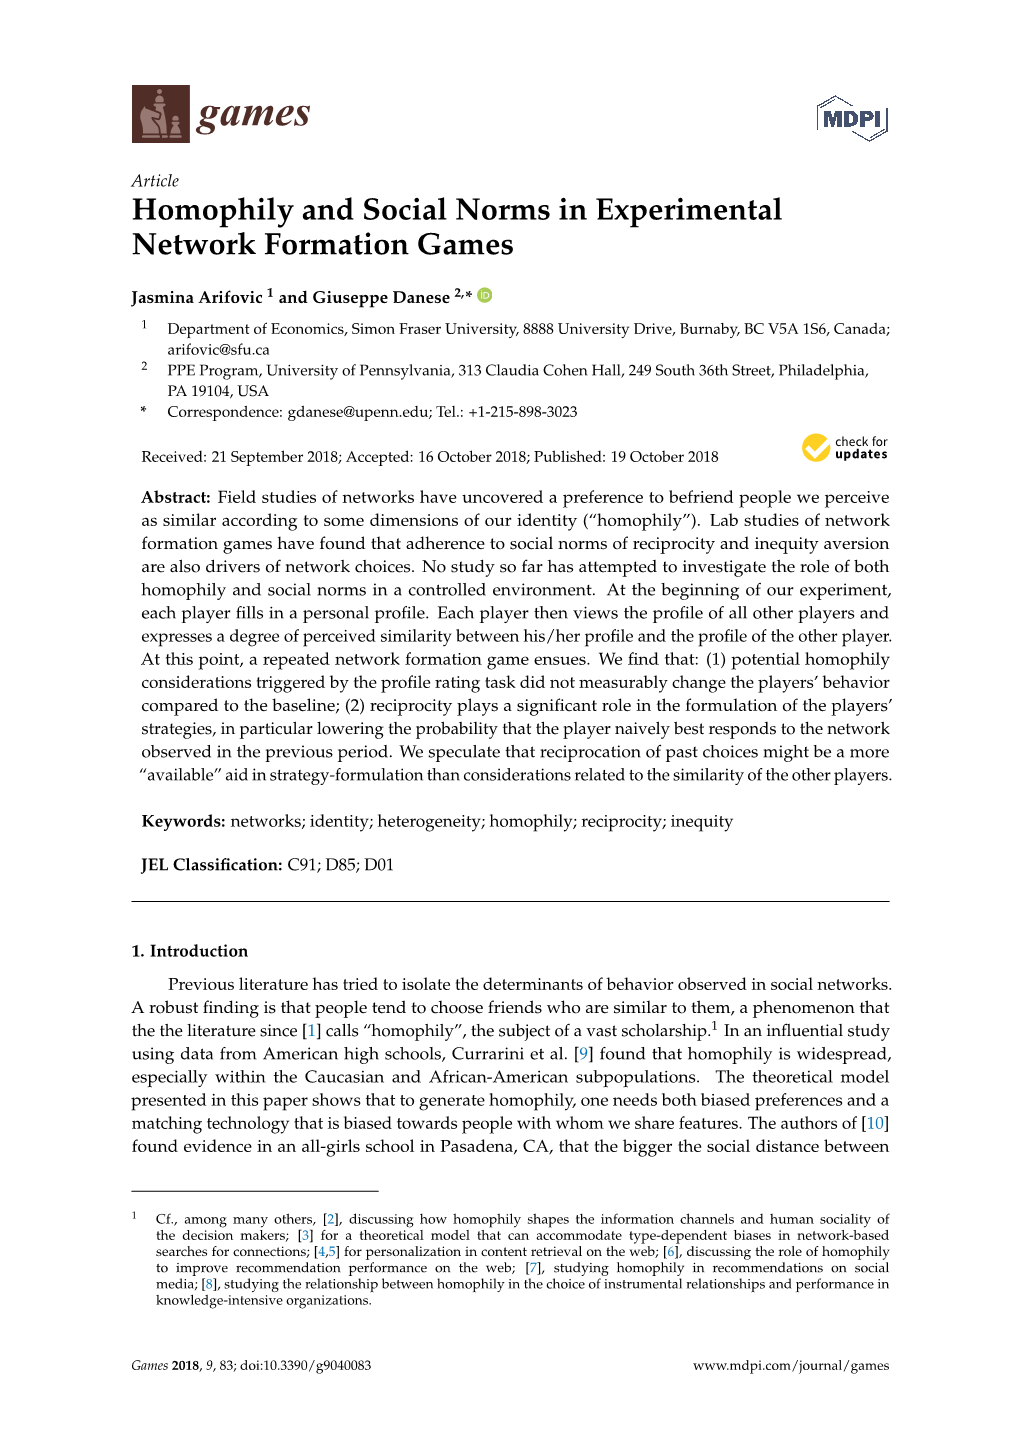 Homophily and Social Norms in Experimental Network Formation Games